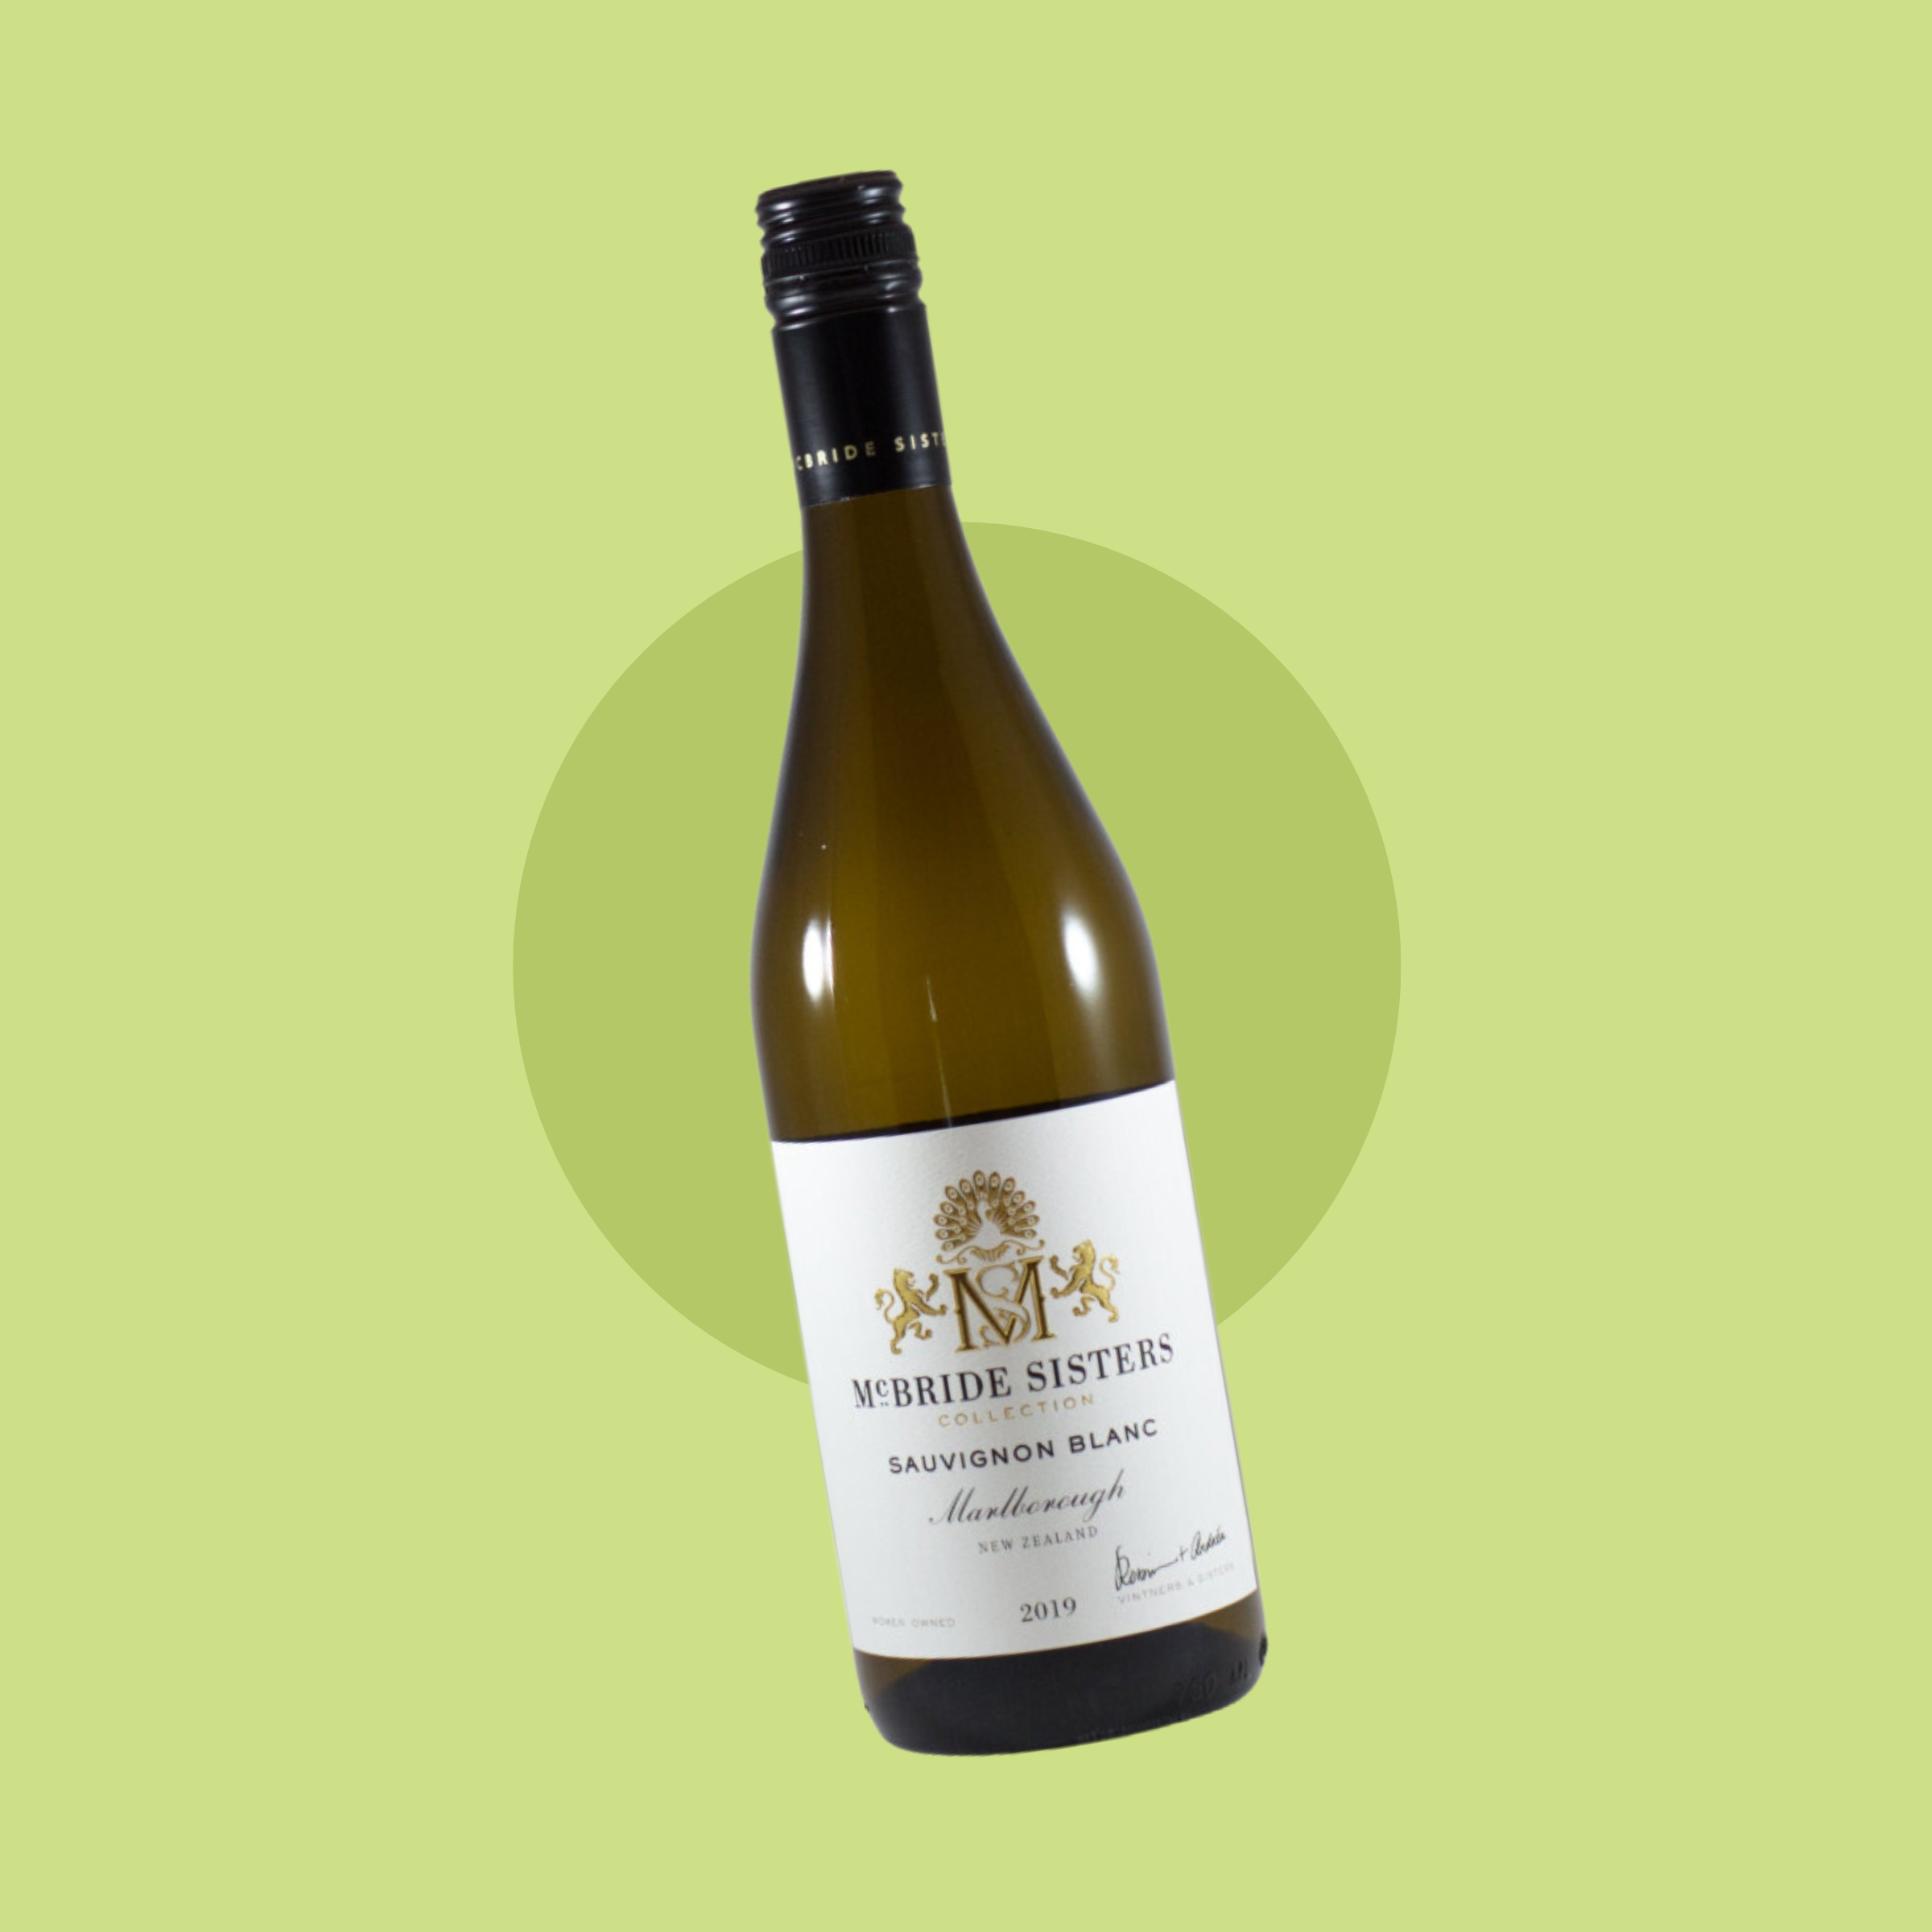 If you love Sauvignon Blanc, try these wines...